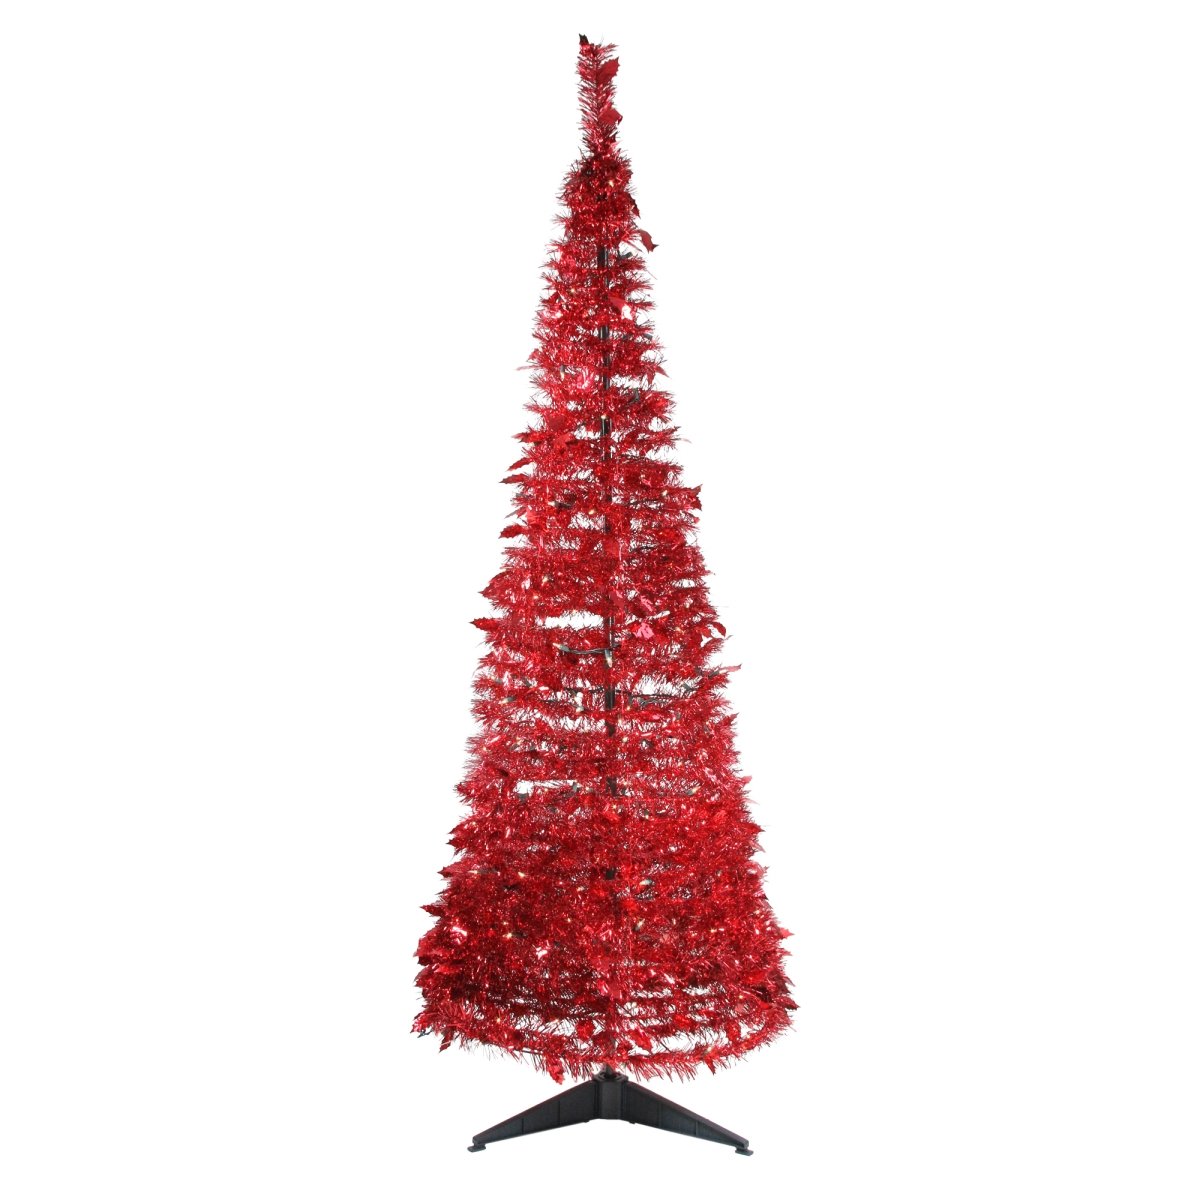 32911585 6 Ft. Pre-lit Red Tinsel Pop-up Artificial Christmas Tree - Clear Lights